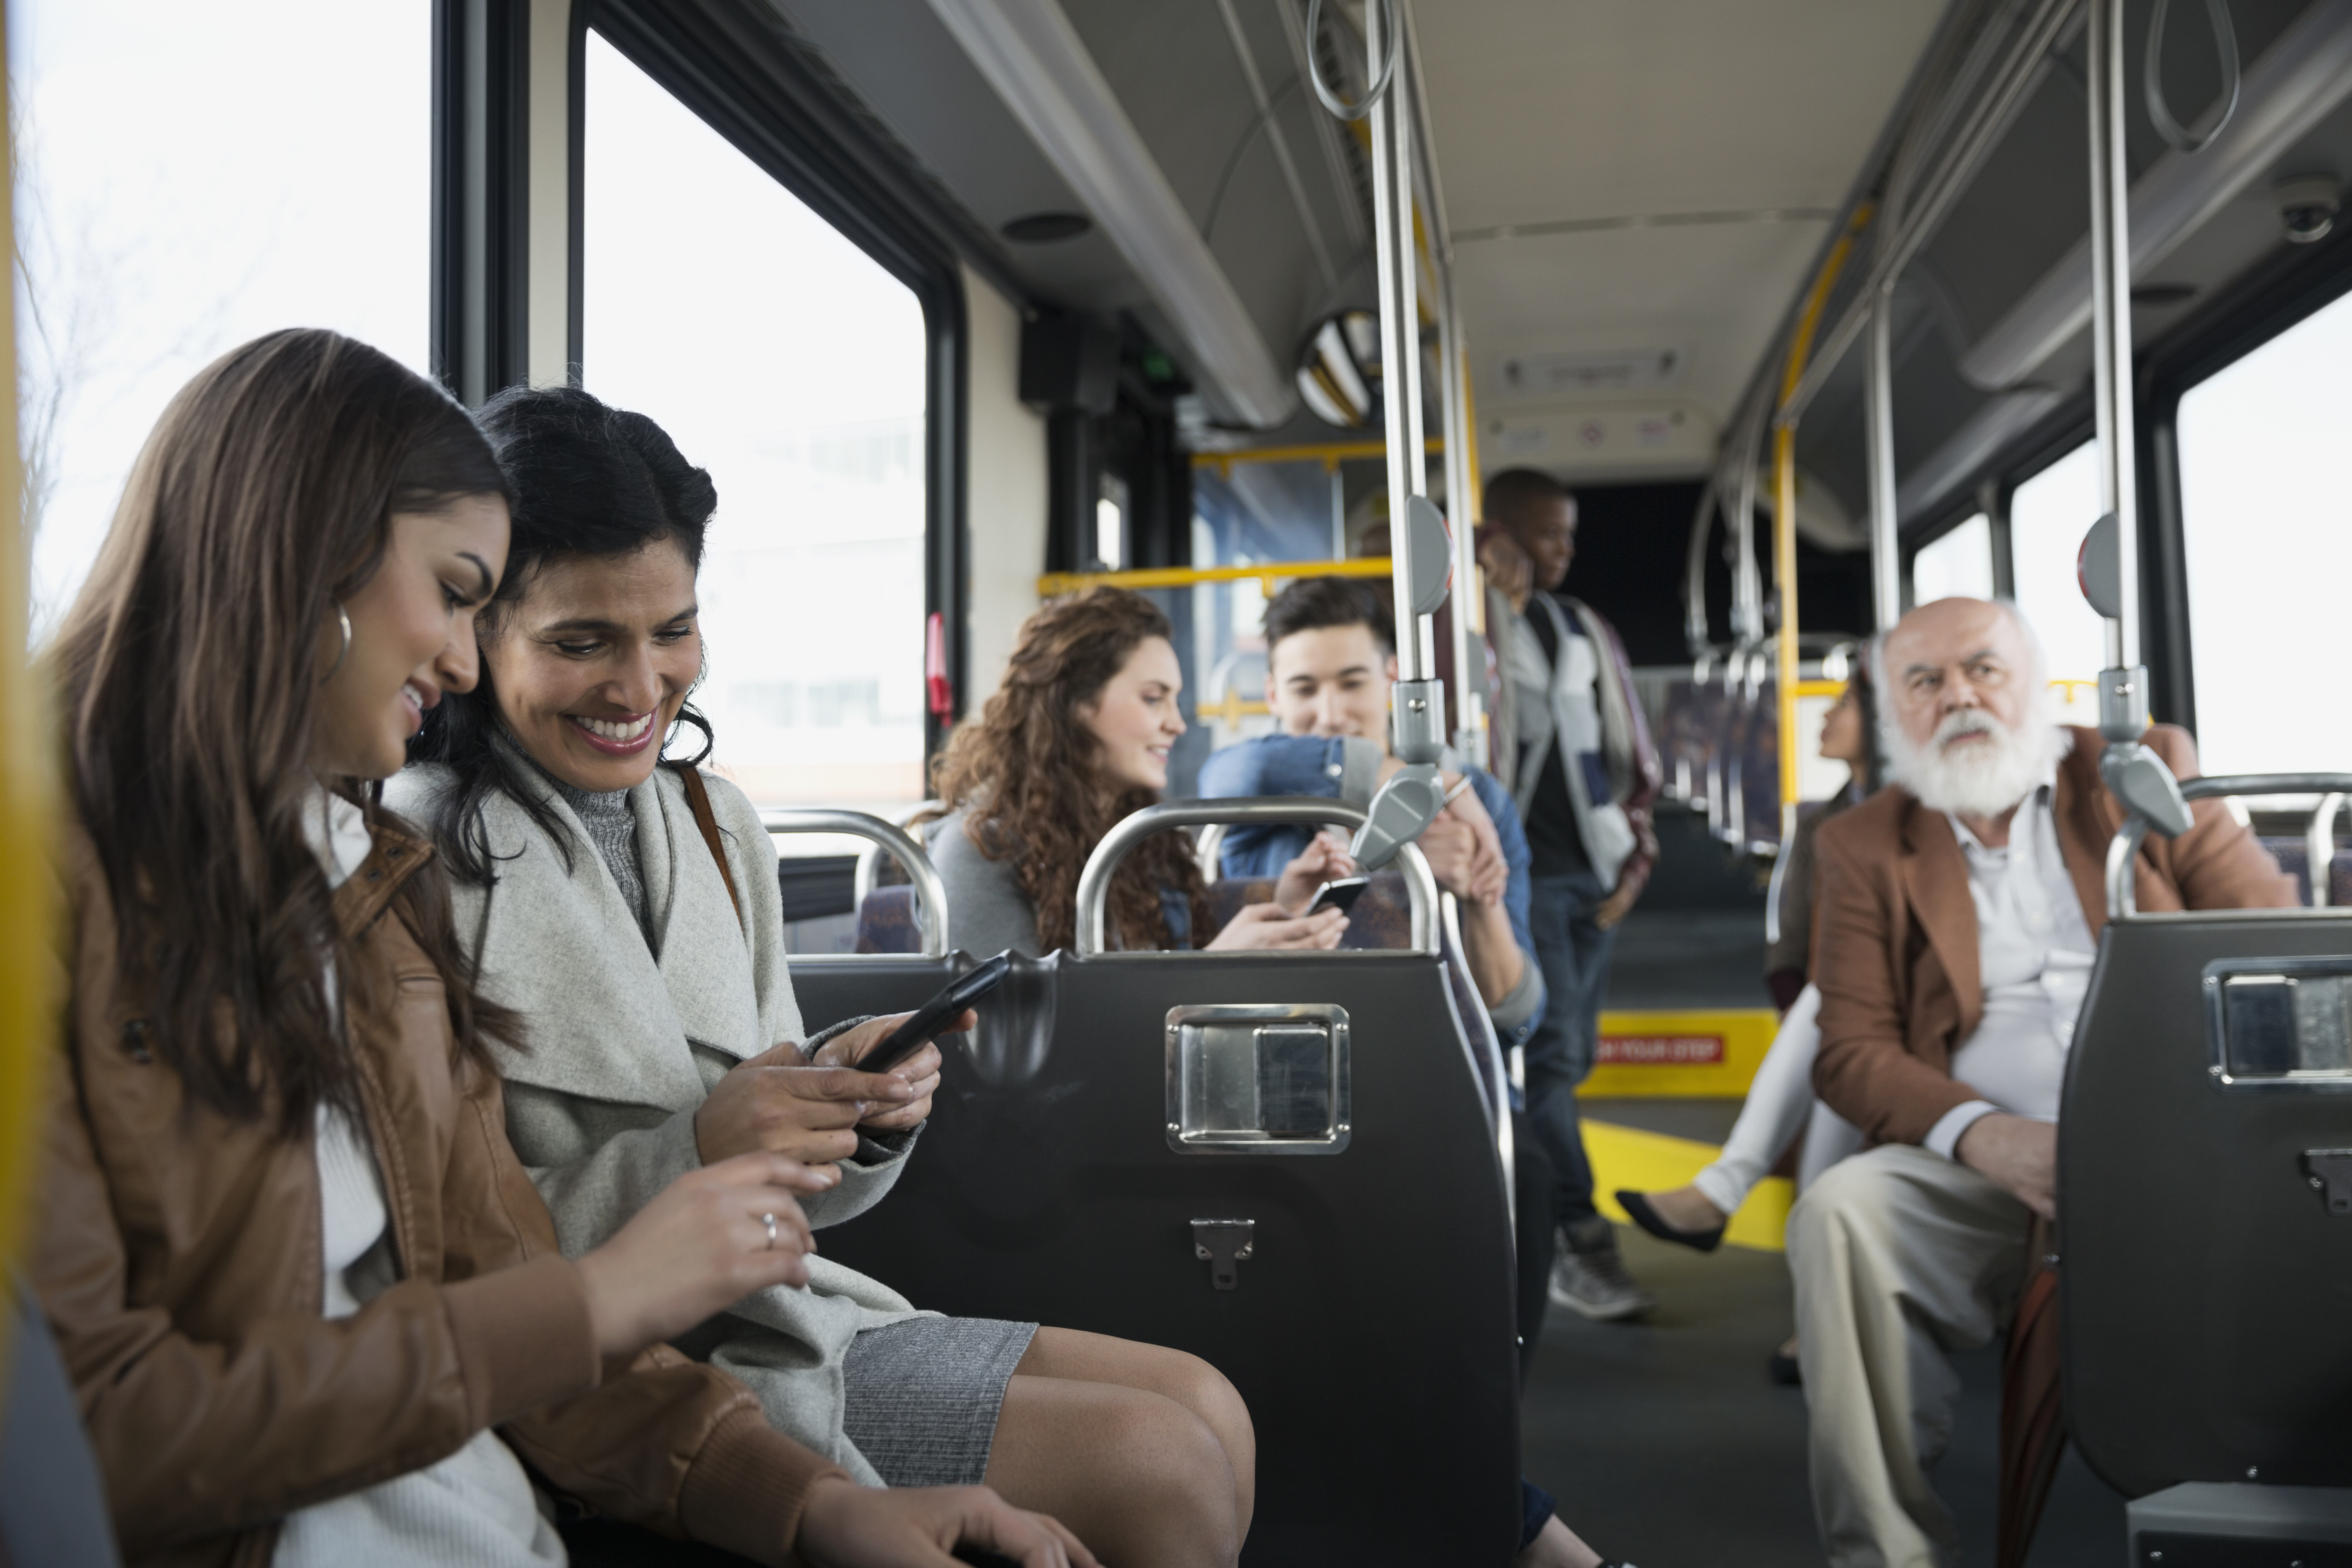 Foothill Transit pilot program gives free rides for one year